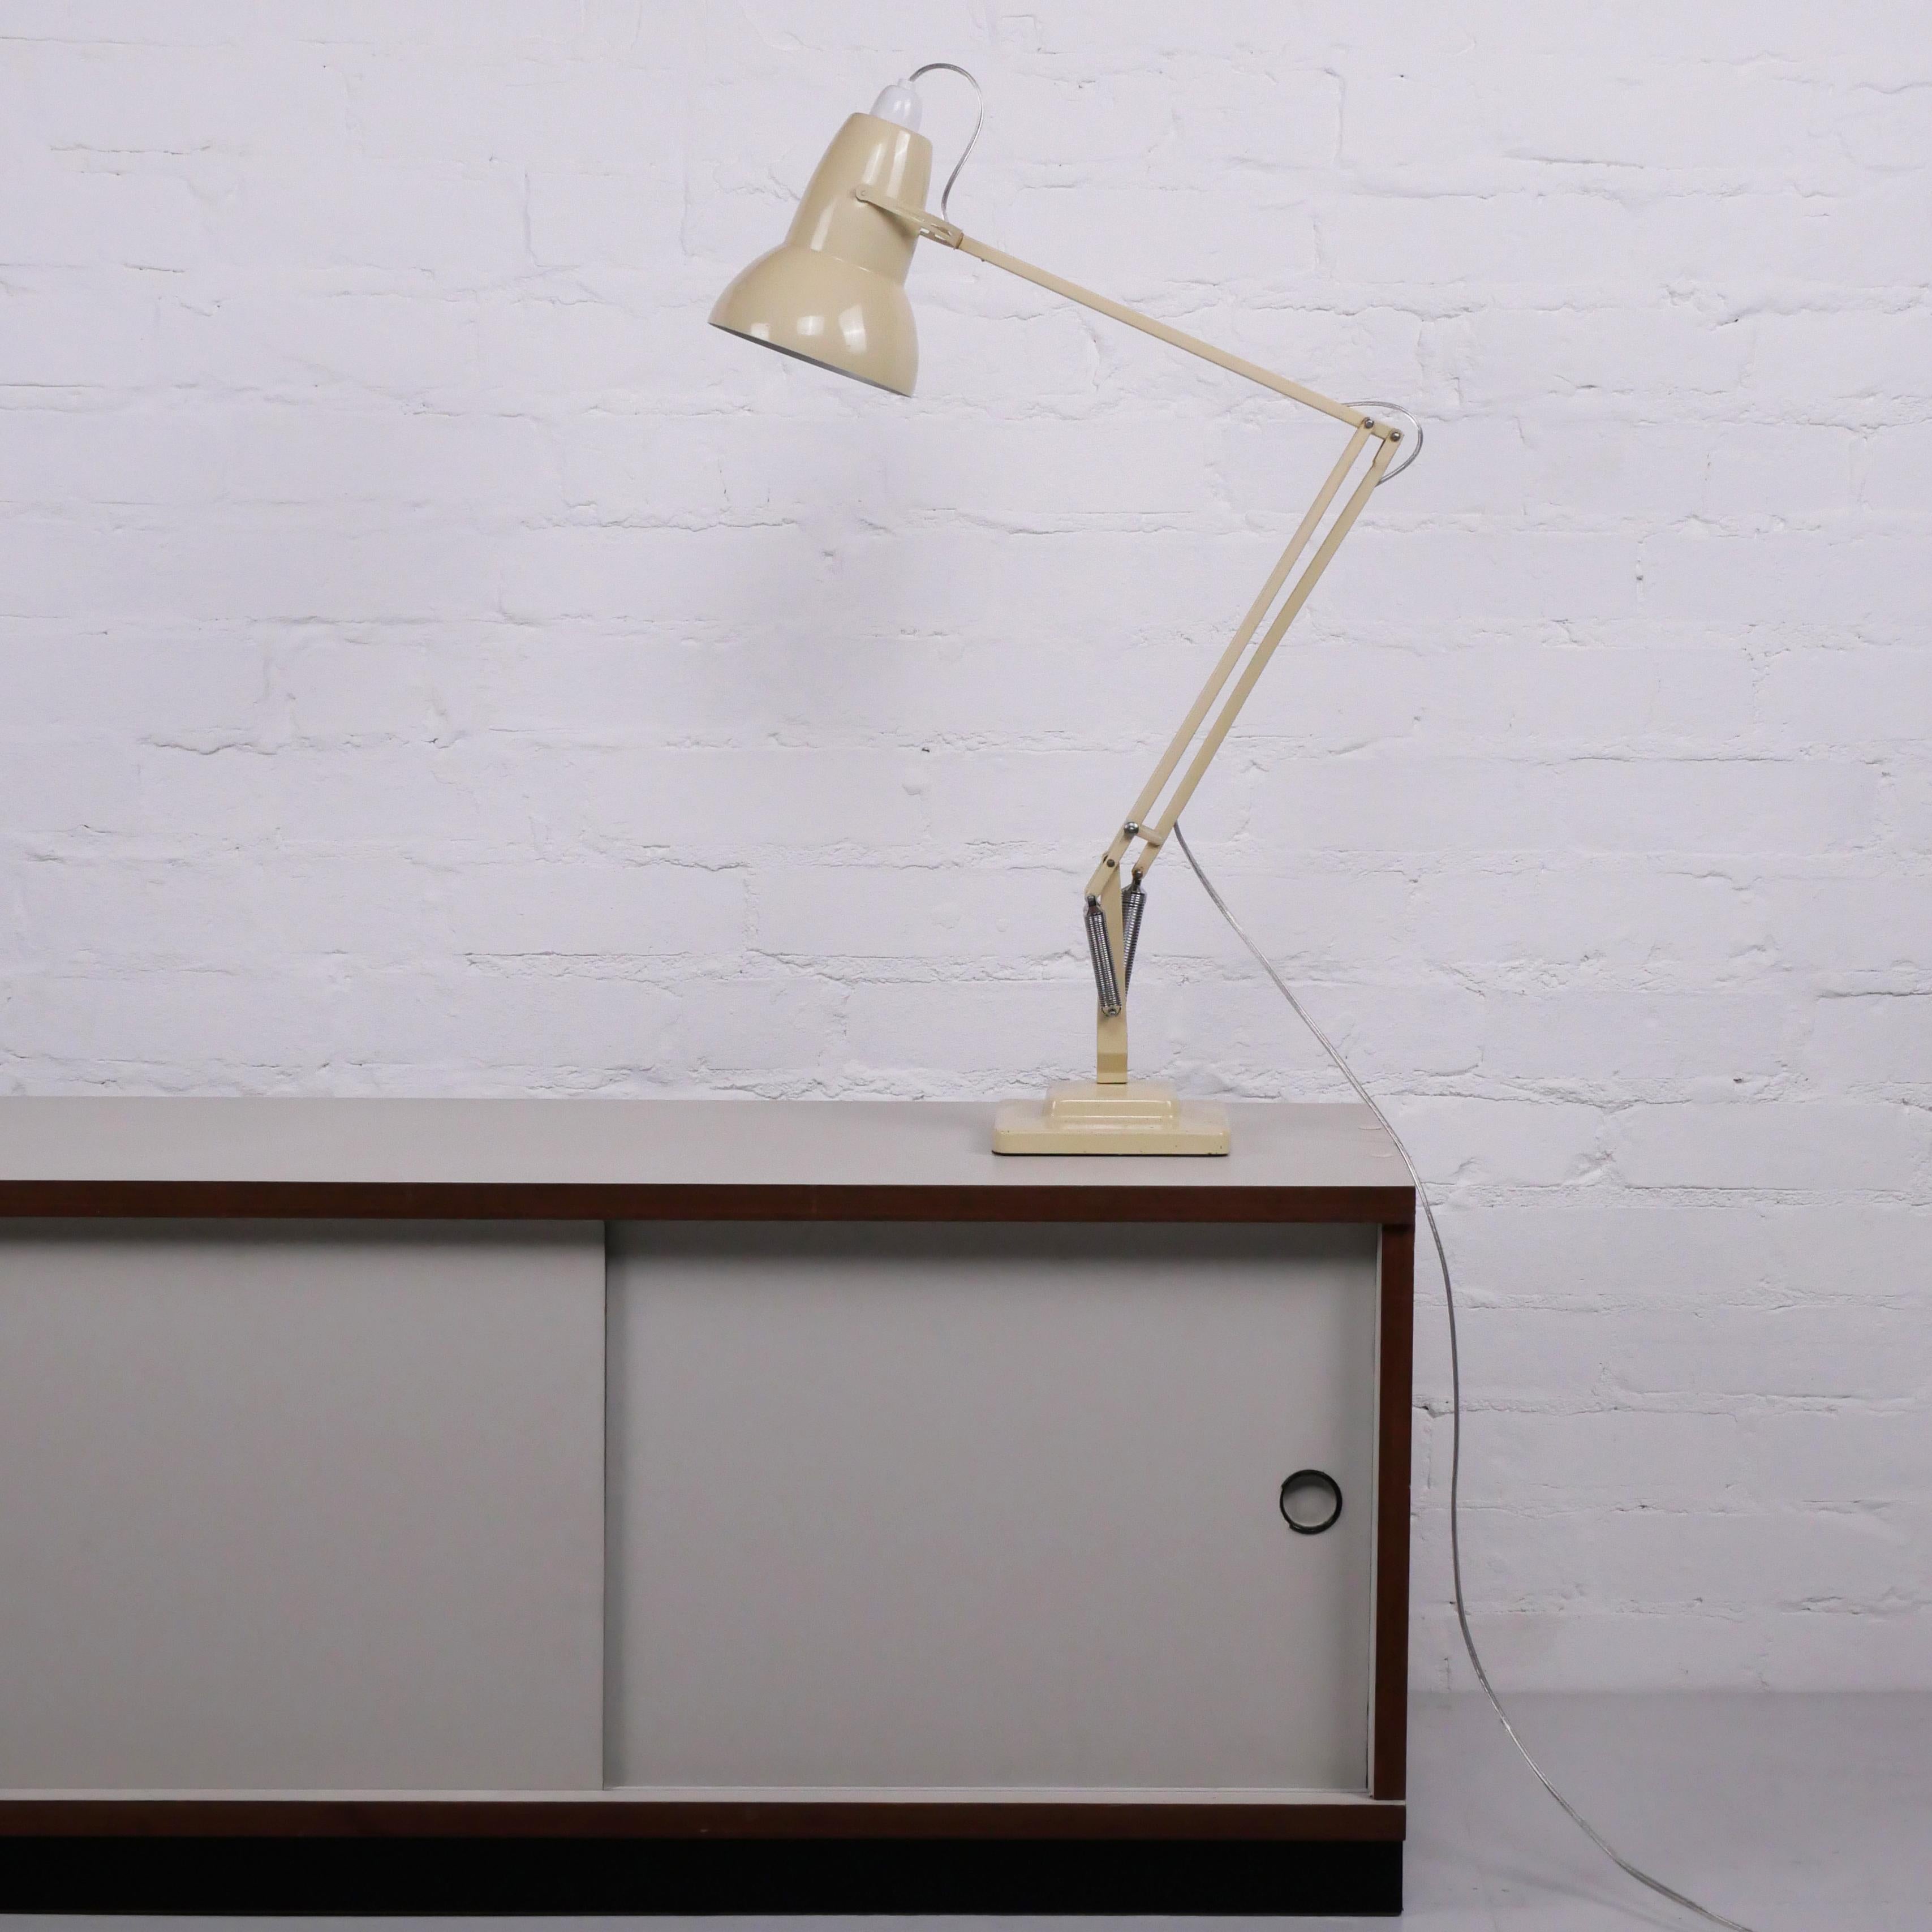 British Anglepoise lamp model 1227, mid-century, original, rewired and fully functioning